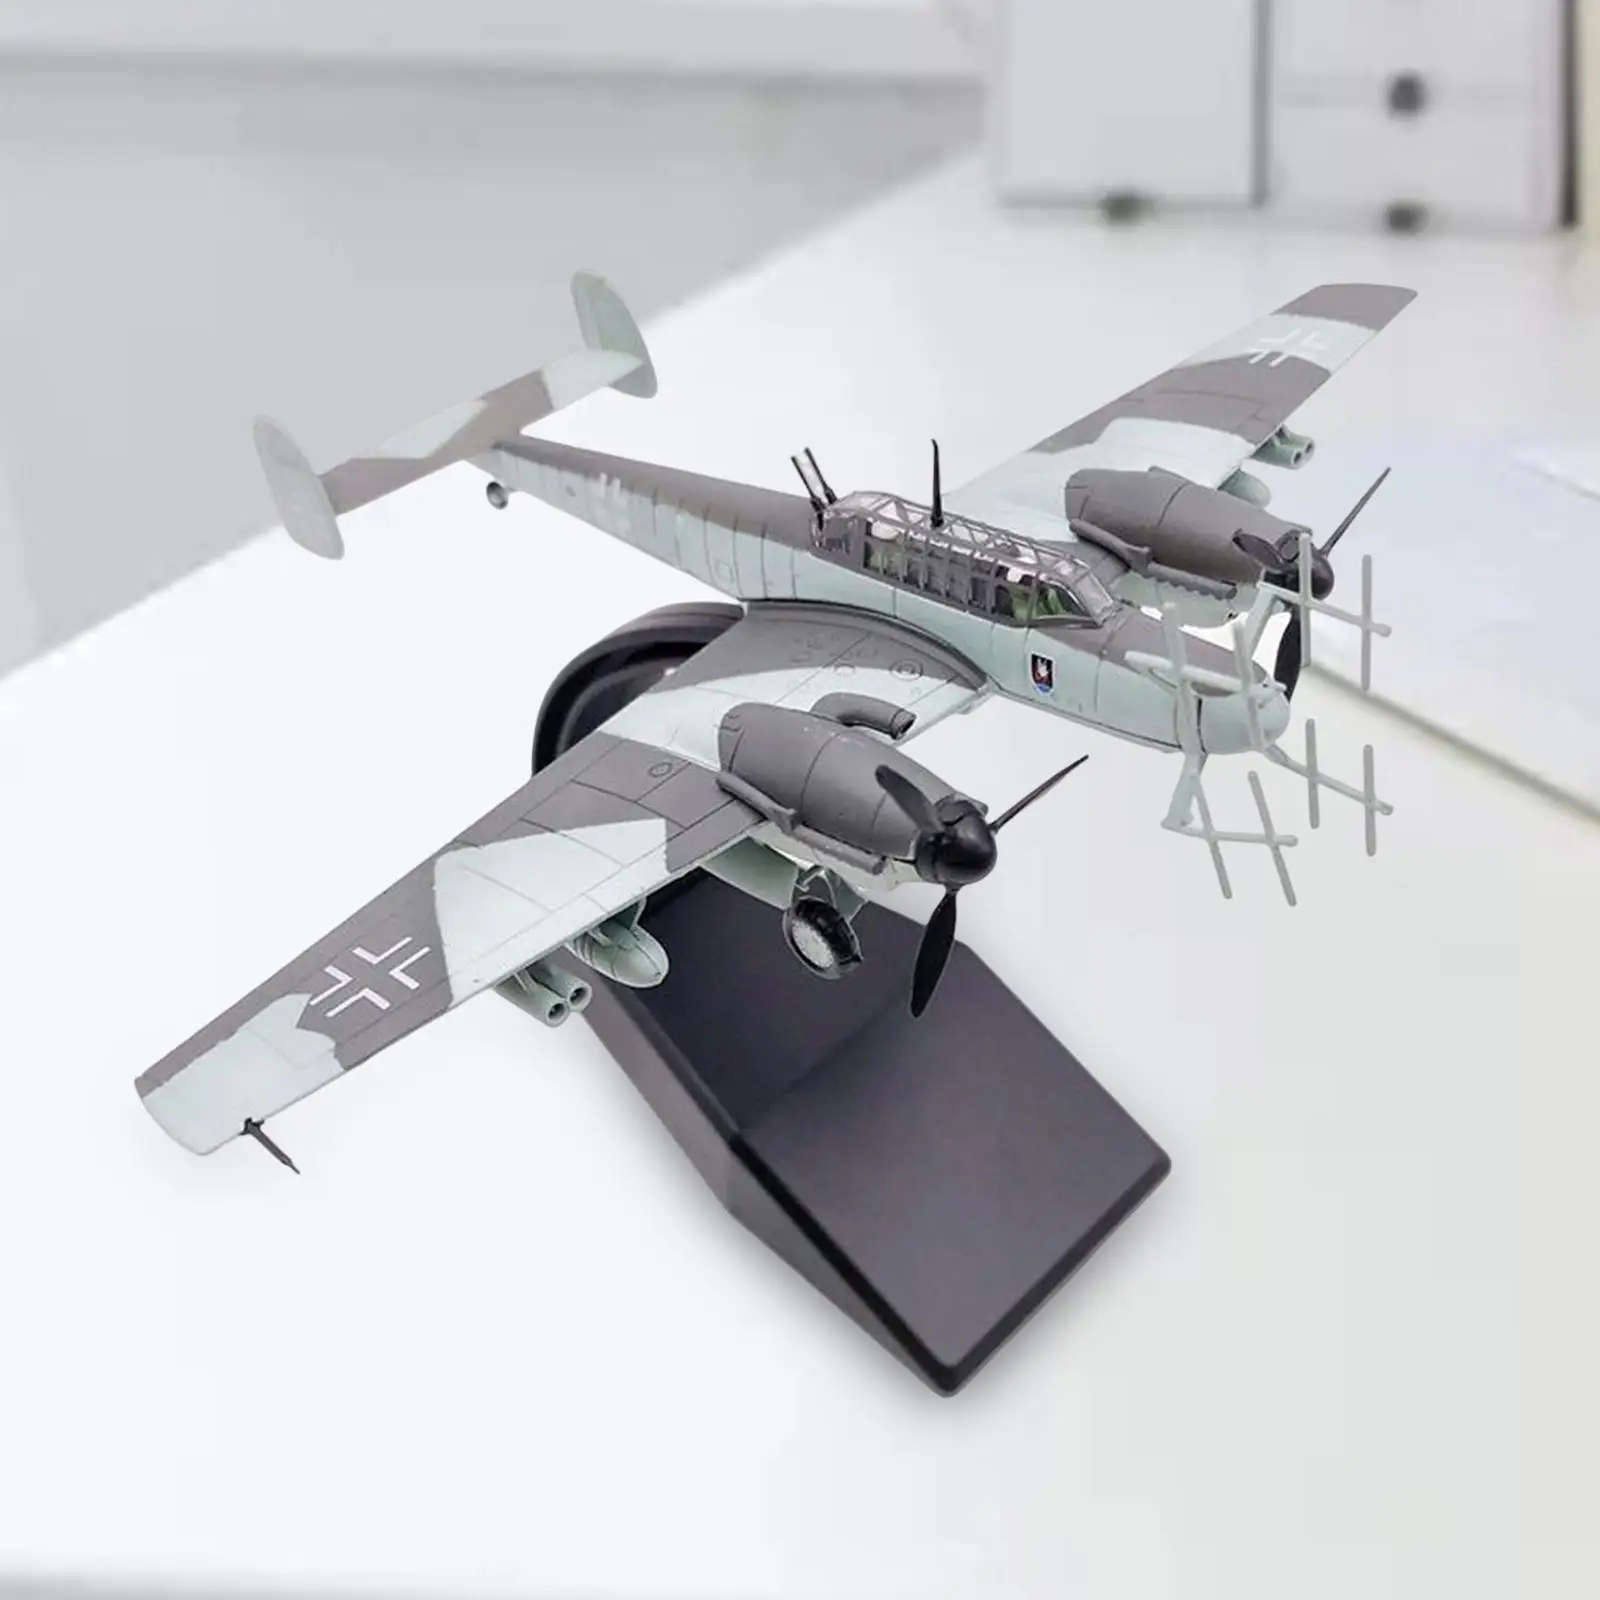 1/100 Scale BF-110 Fighter Model Desktop with Stand Accessories Souvenir